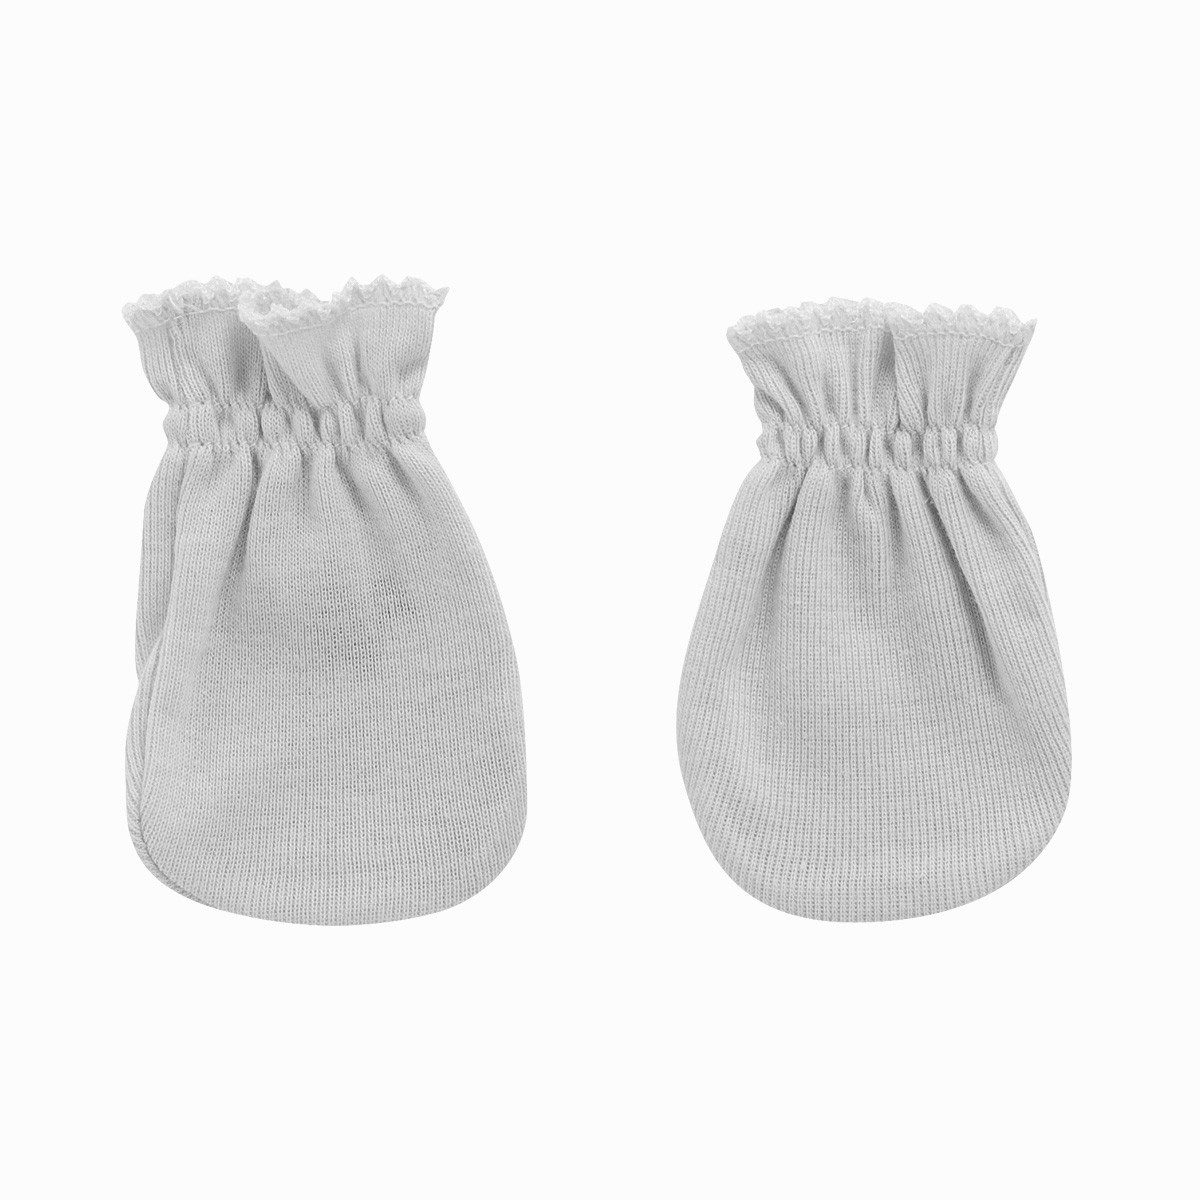 PAIR OF MITTENS LISO GREY CAMBRASS - 1